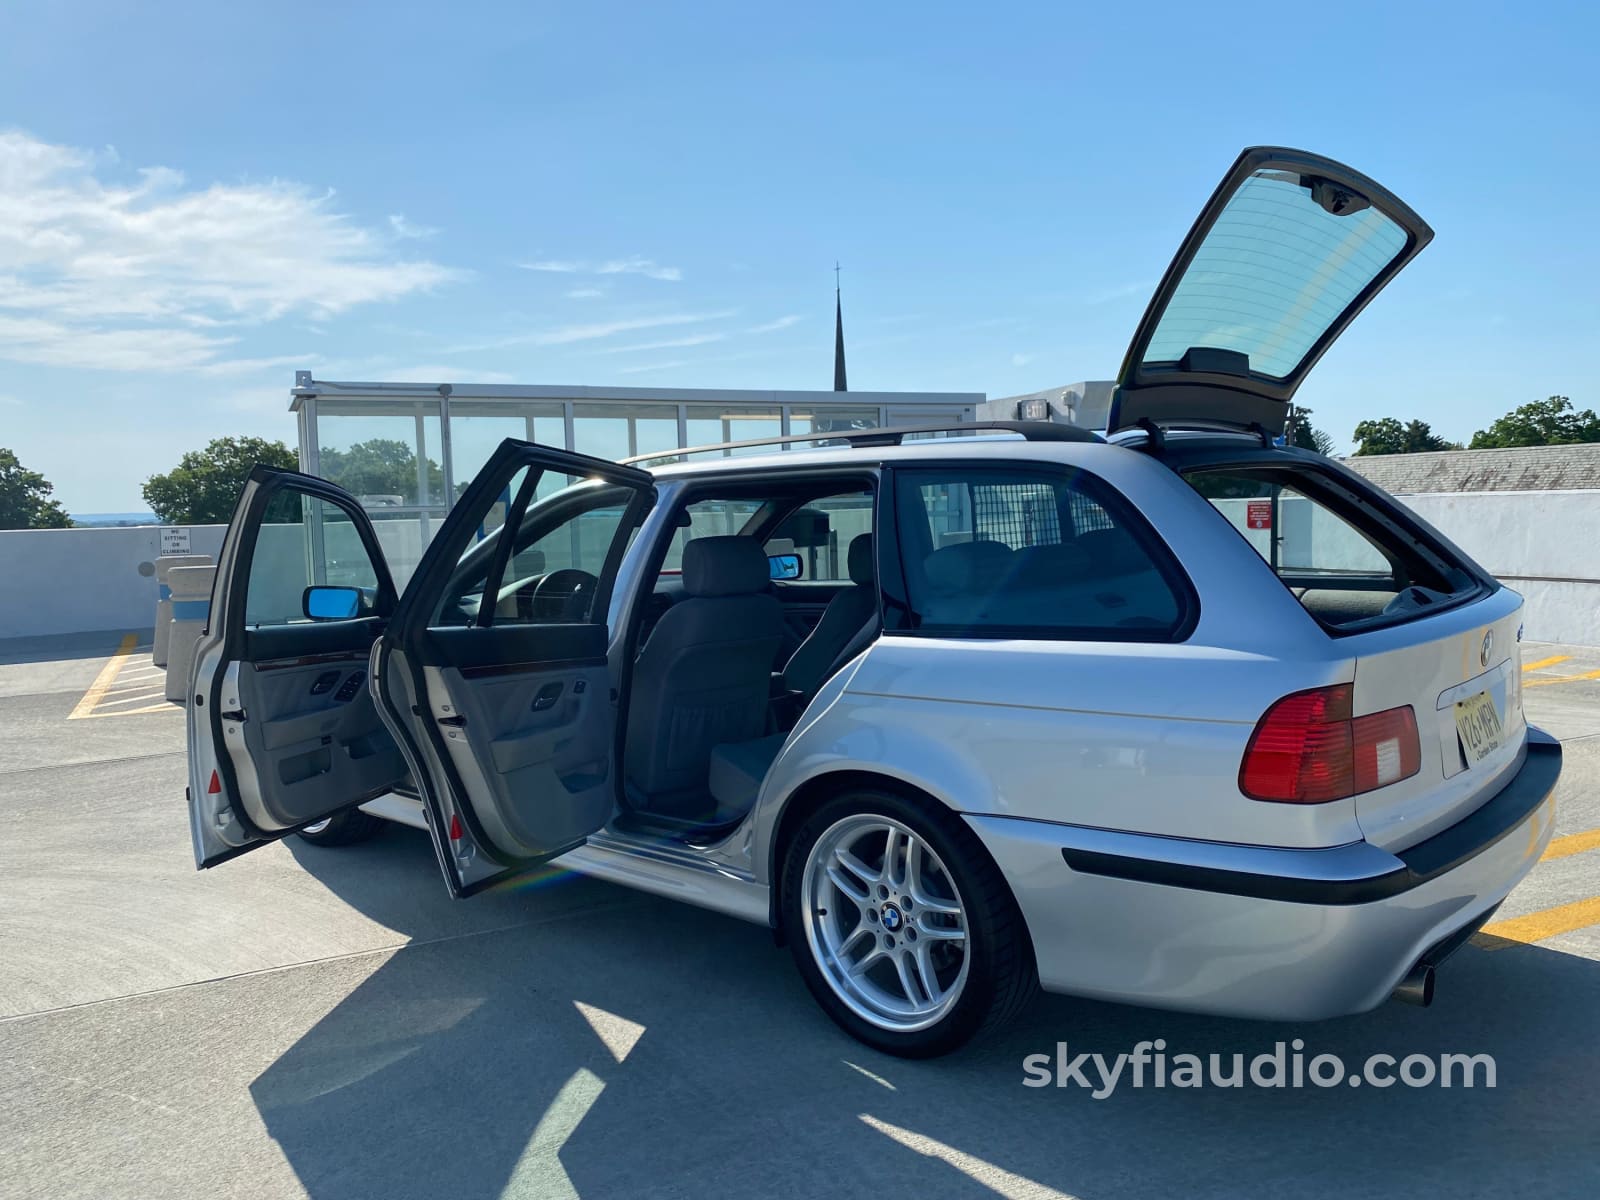 2003 Bmw E39 540I Sport Wagon M-Sport - 1 Of 189 In The Usa Vehicle